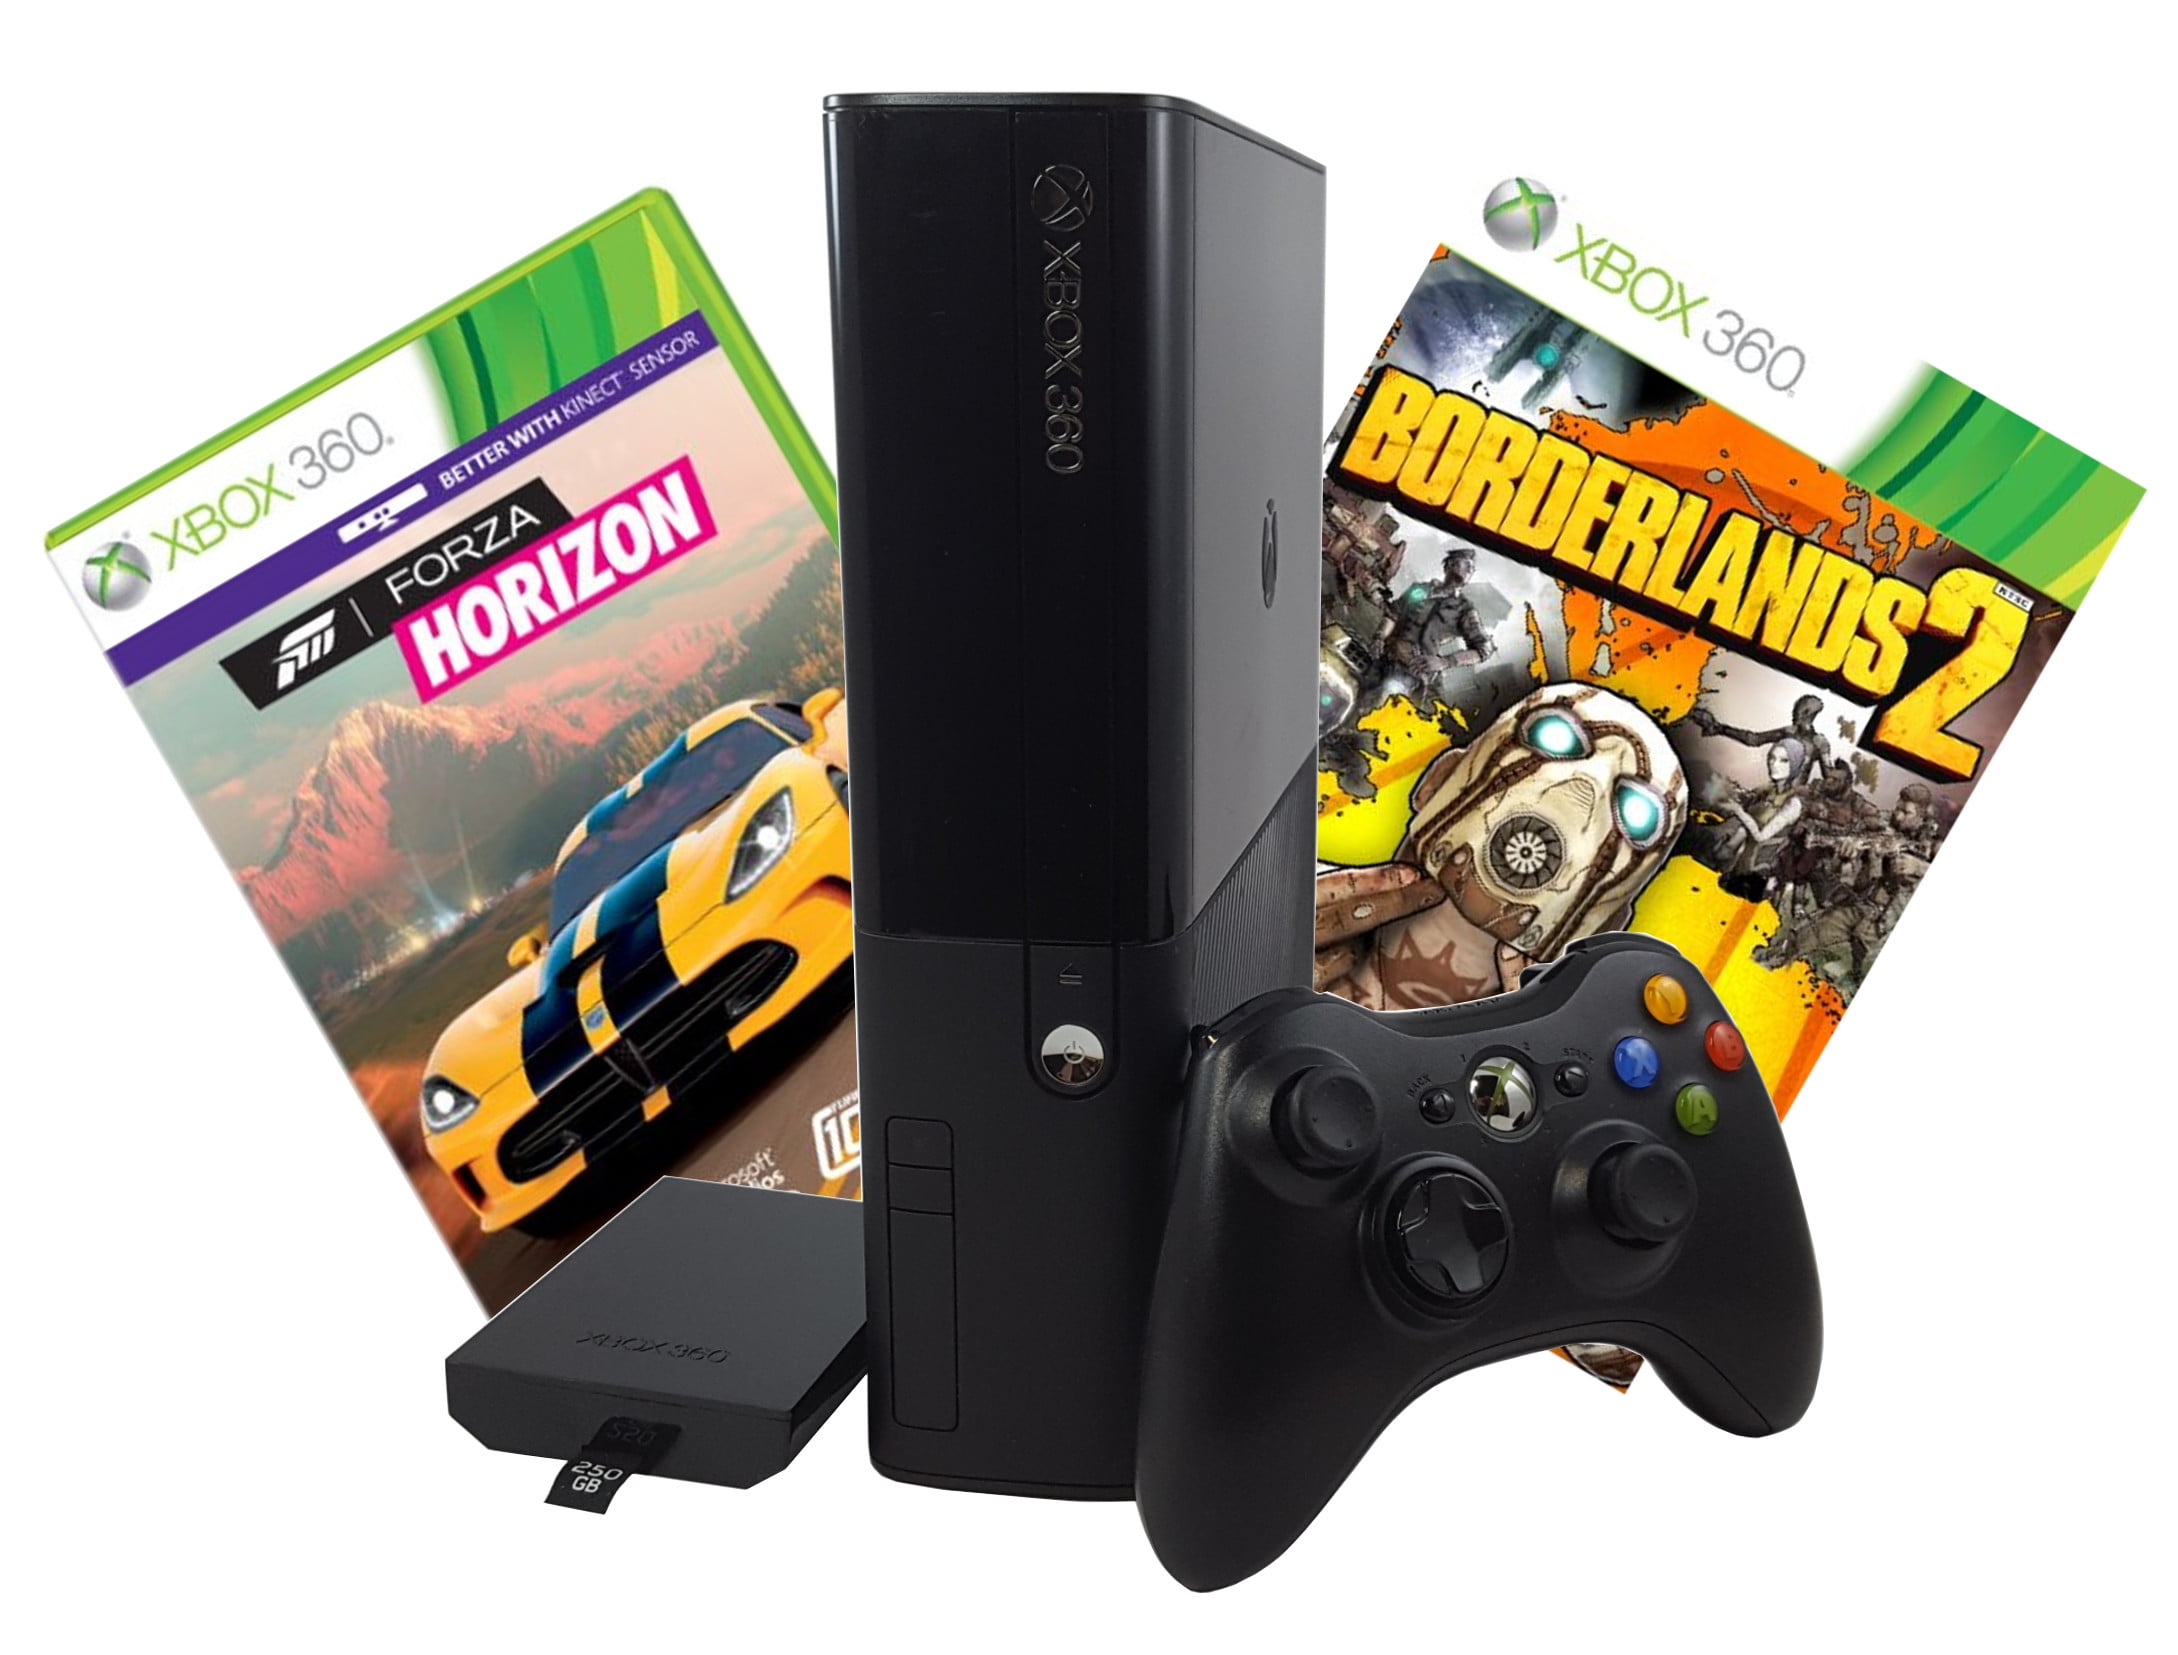 Forza Horizon XBOX 360 ROM - Download ROMs & ISO For Gaming